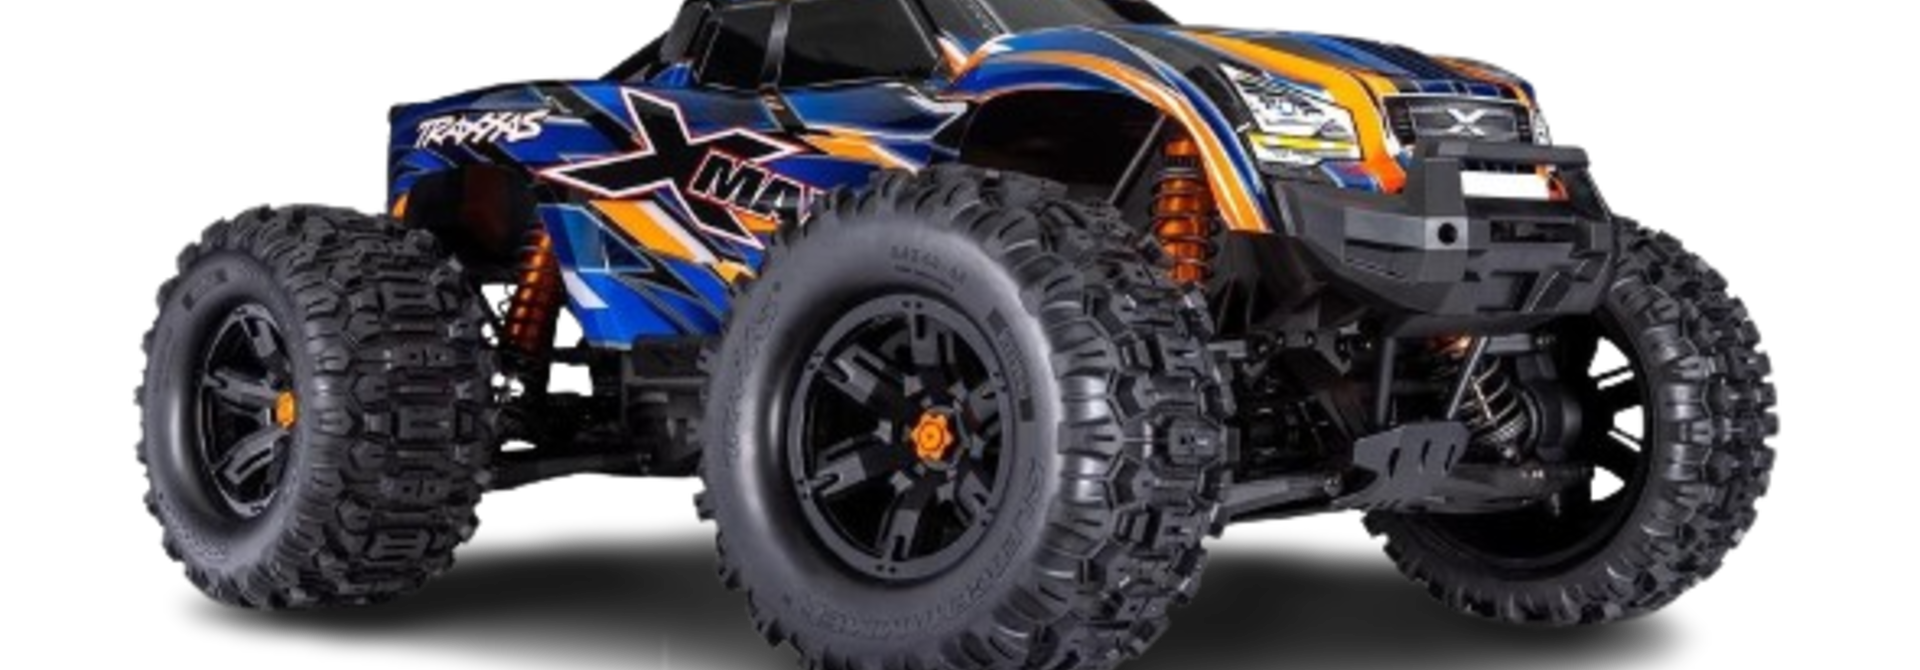 Traxxas X-Maxx 4WD 8S Belted Monster Truck Orange TRX77096-4ORNG